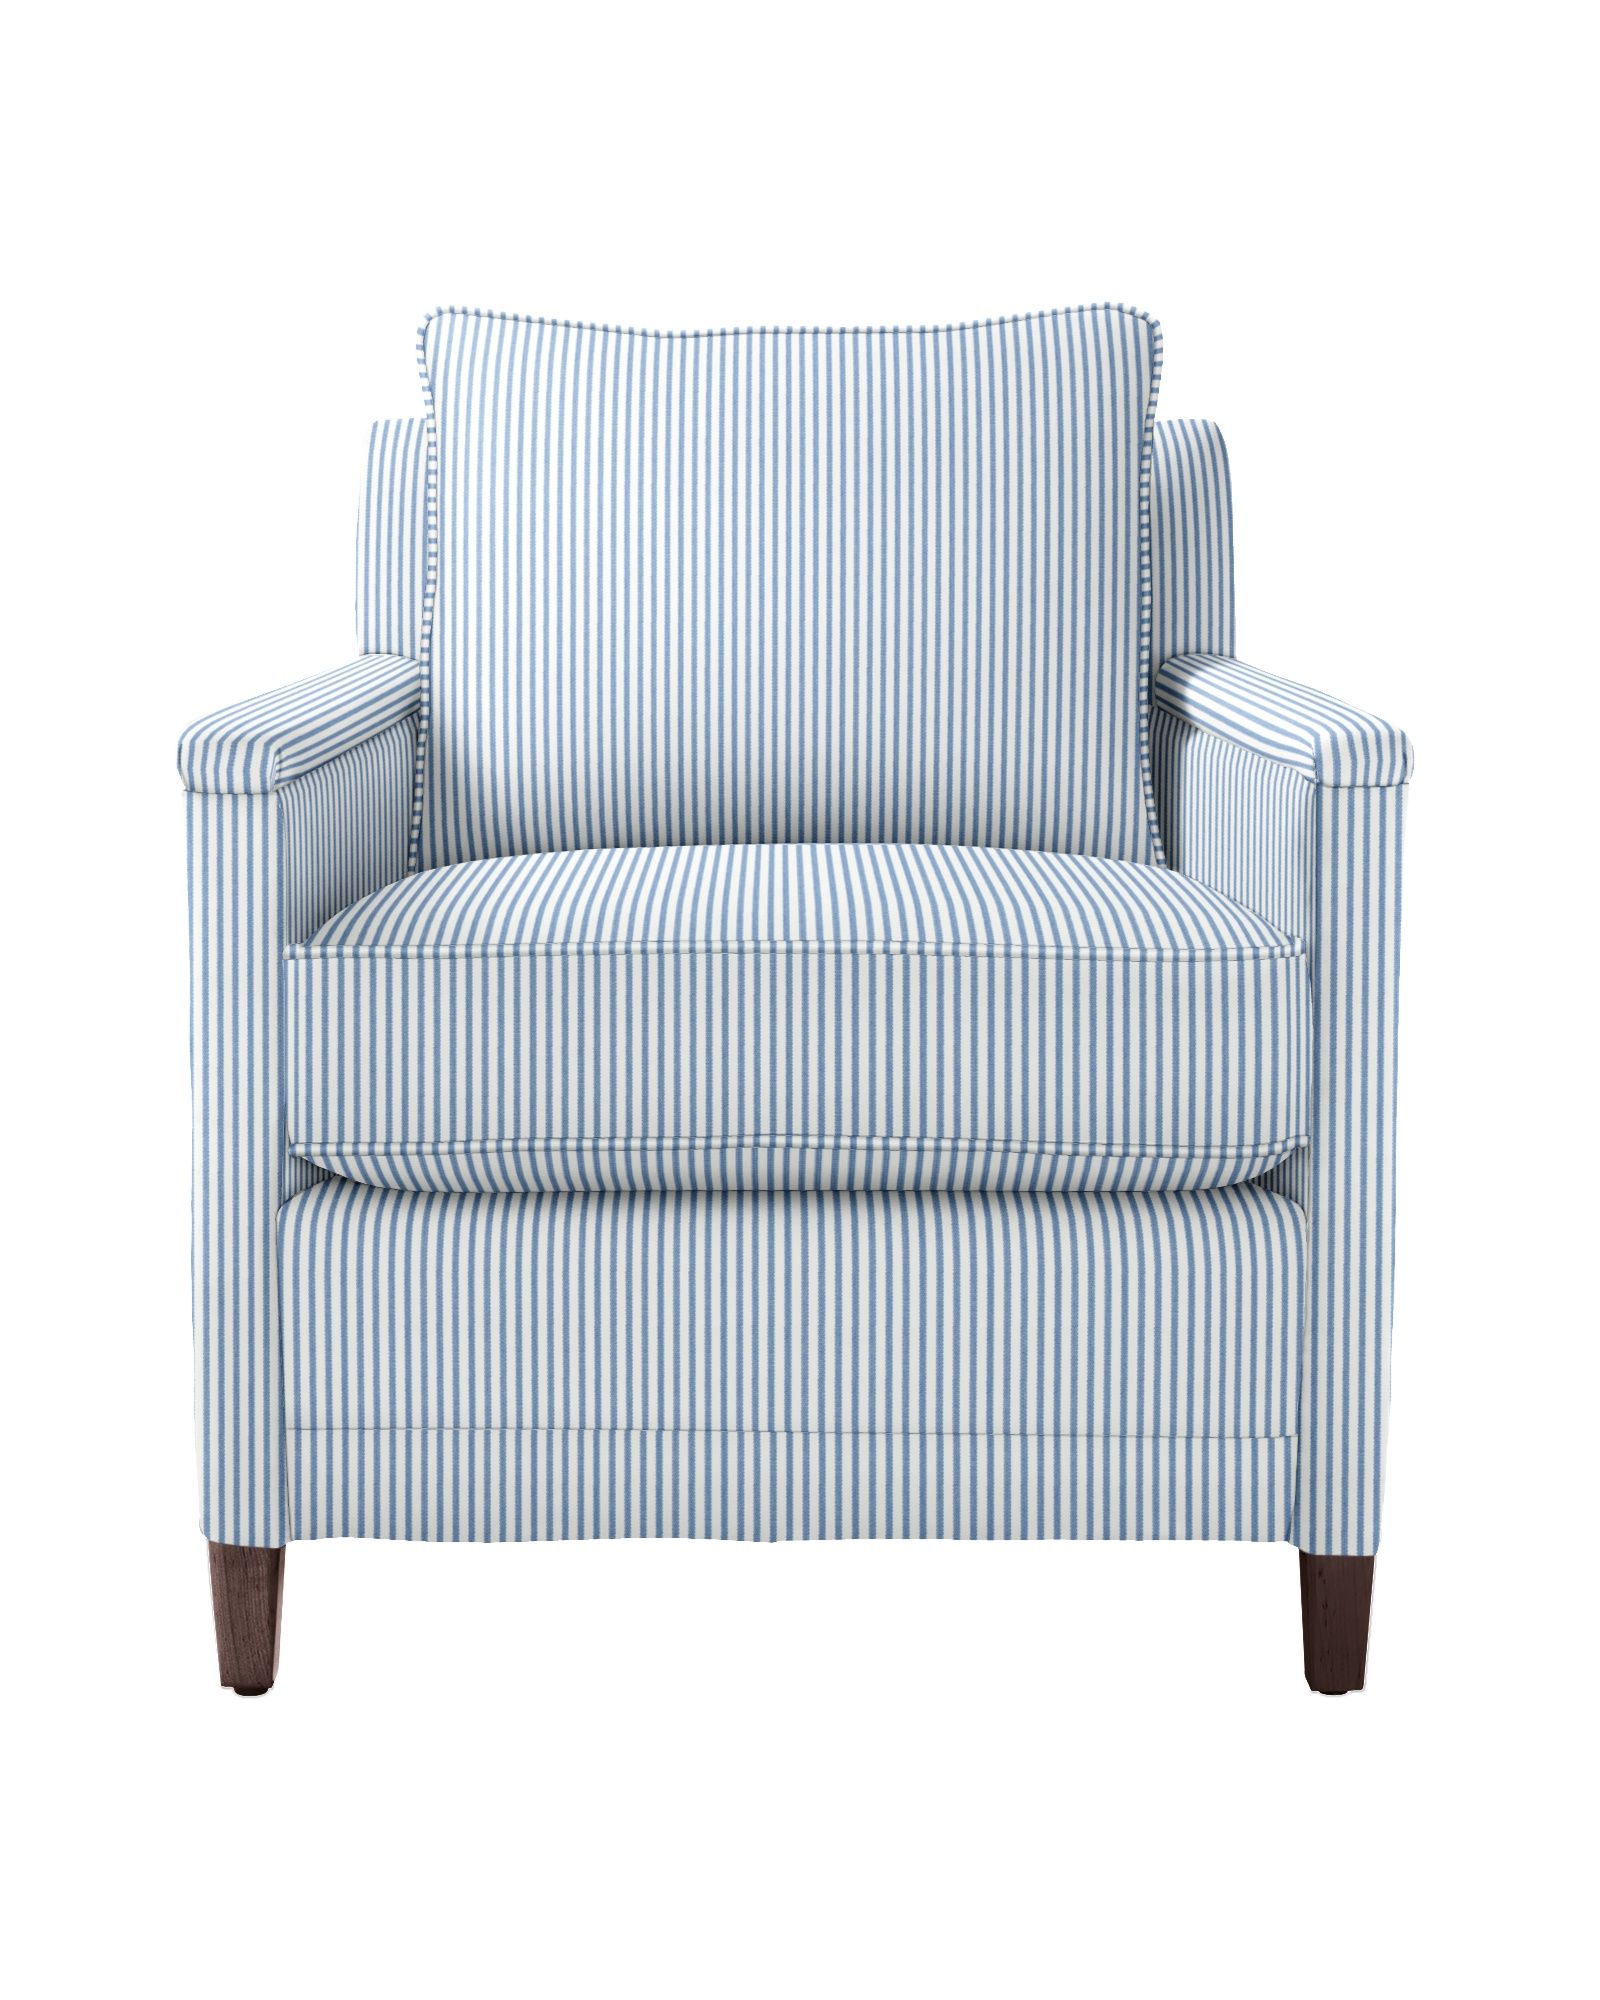 Spruce Street Chair | Serena and Lily